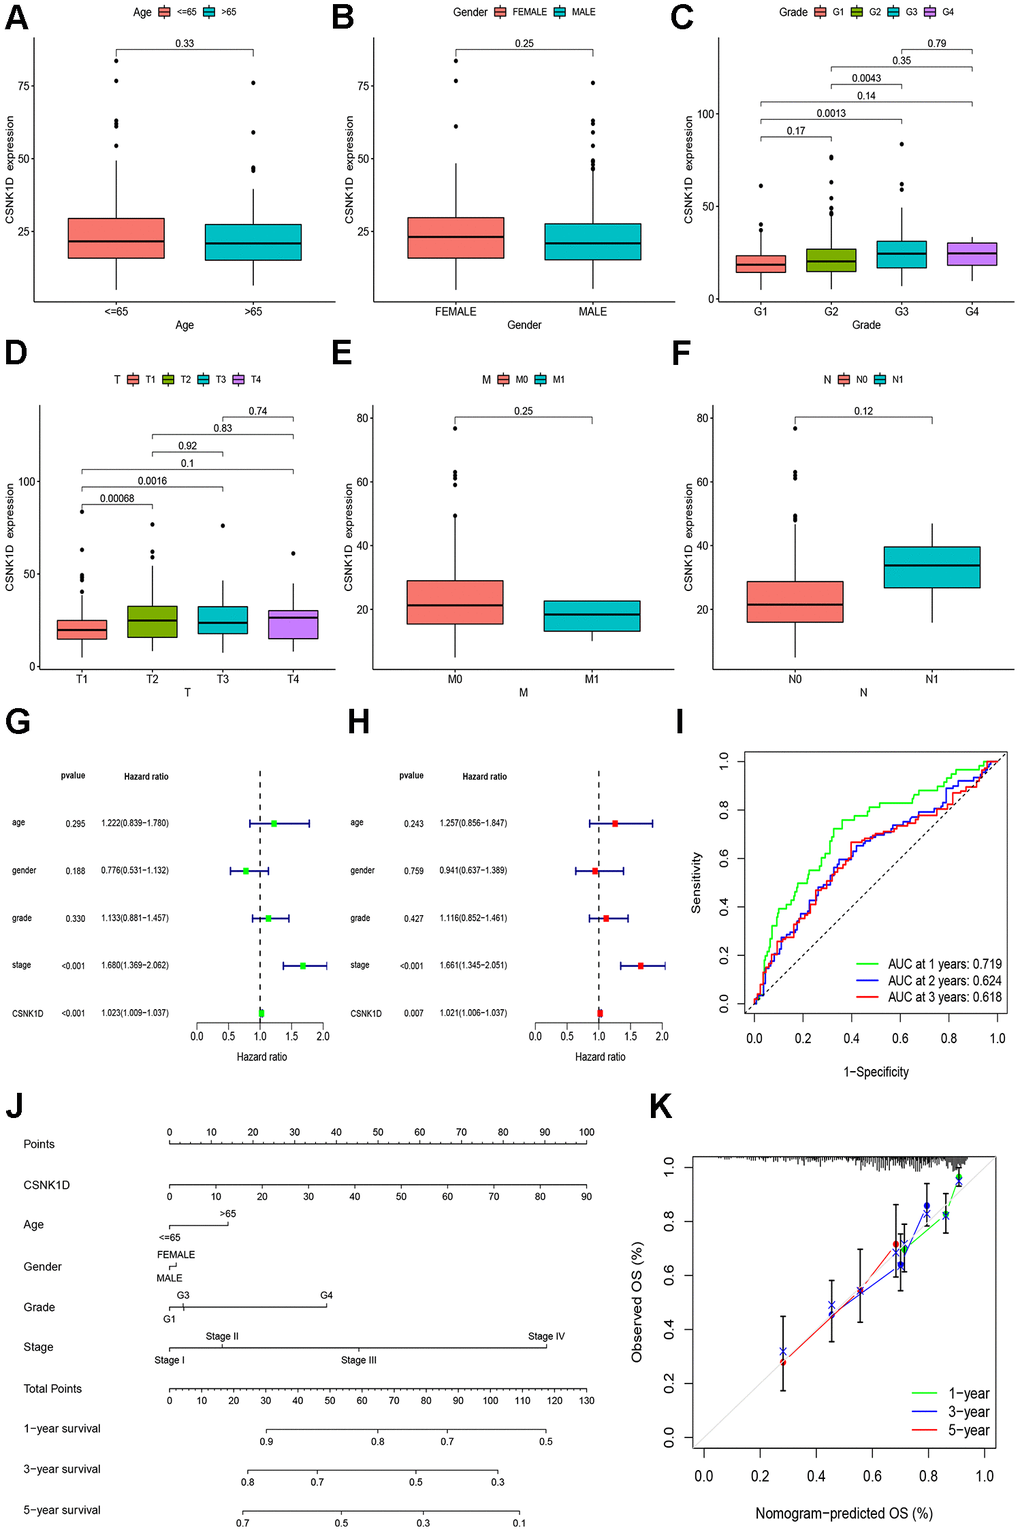 Clinical correlation analysis of CSNK1D in hepatocellular carcinoma based on the TCGA-LIHC cohort. Variation analysis of CSNK1D expression in different Ages (A), Gender (B), Grade (C), T stage (D), M stage (E), and N stage (F). (G, H) The prognostic significance of CSNK1D was analyzed by univariate and multivariate COX analysis. (I) Prognostic evaluation efficacy of CSNK1D by ROC. (J) A nomogram based on CSNK1D expression and stage, Gender, Age, and grade. (K) The calibration curves for 1, 3, and 5-year OS.